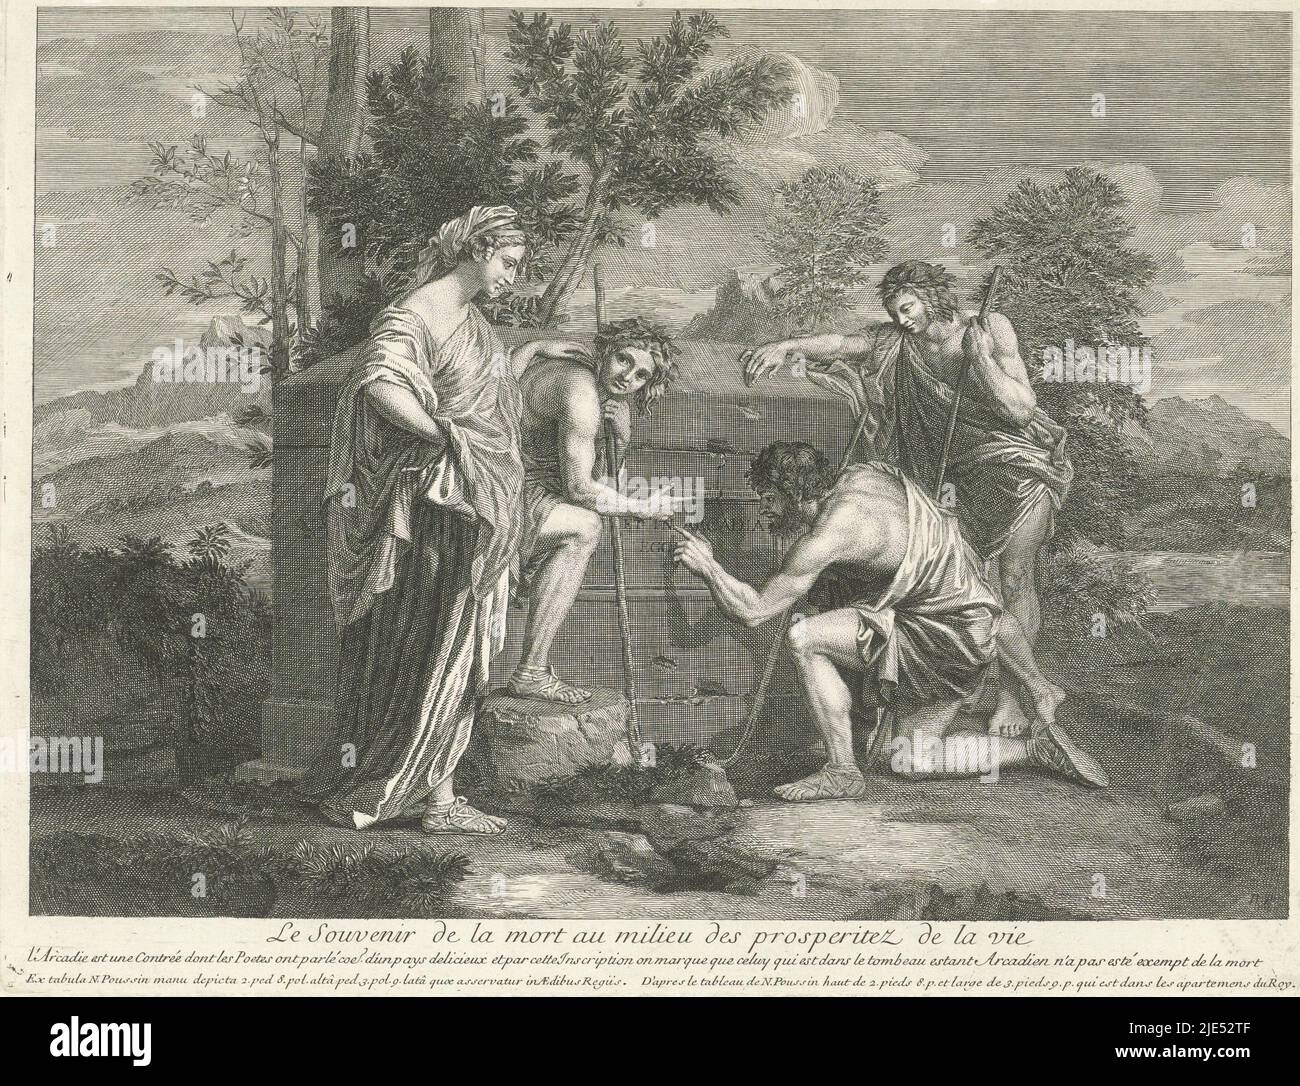 Landscape with three shepherds and a woman. They discover an ancient sarcophagus with an inscription in Latin: 'Et in Arcadia ego'. In the margin a caption in French. Landscape with shepherds near an ancient sarcophagus: The Souvenir of the Mortality in the Environment of the Prosperity of Life., print maker: Bernard Picart, (mentioned on object), after: Nicolas Poussin, (mentioned on object), Paris, 1694, paper, etching, engraving, h 260 mm × w 387 mm Stock Photo